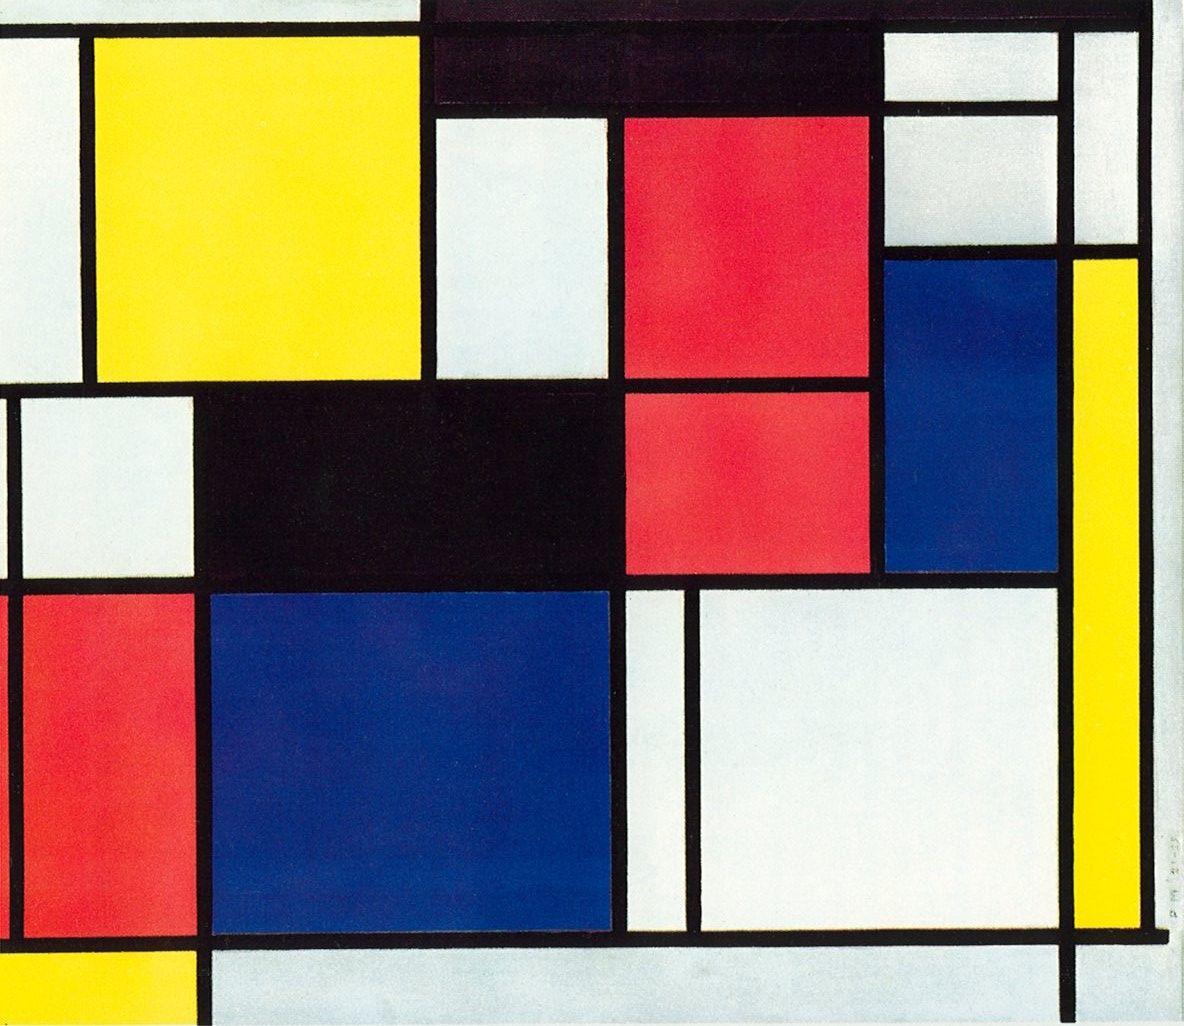 Piet Mondrian 1927 work Composition with Red, Yellow and Blue